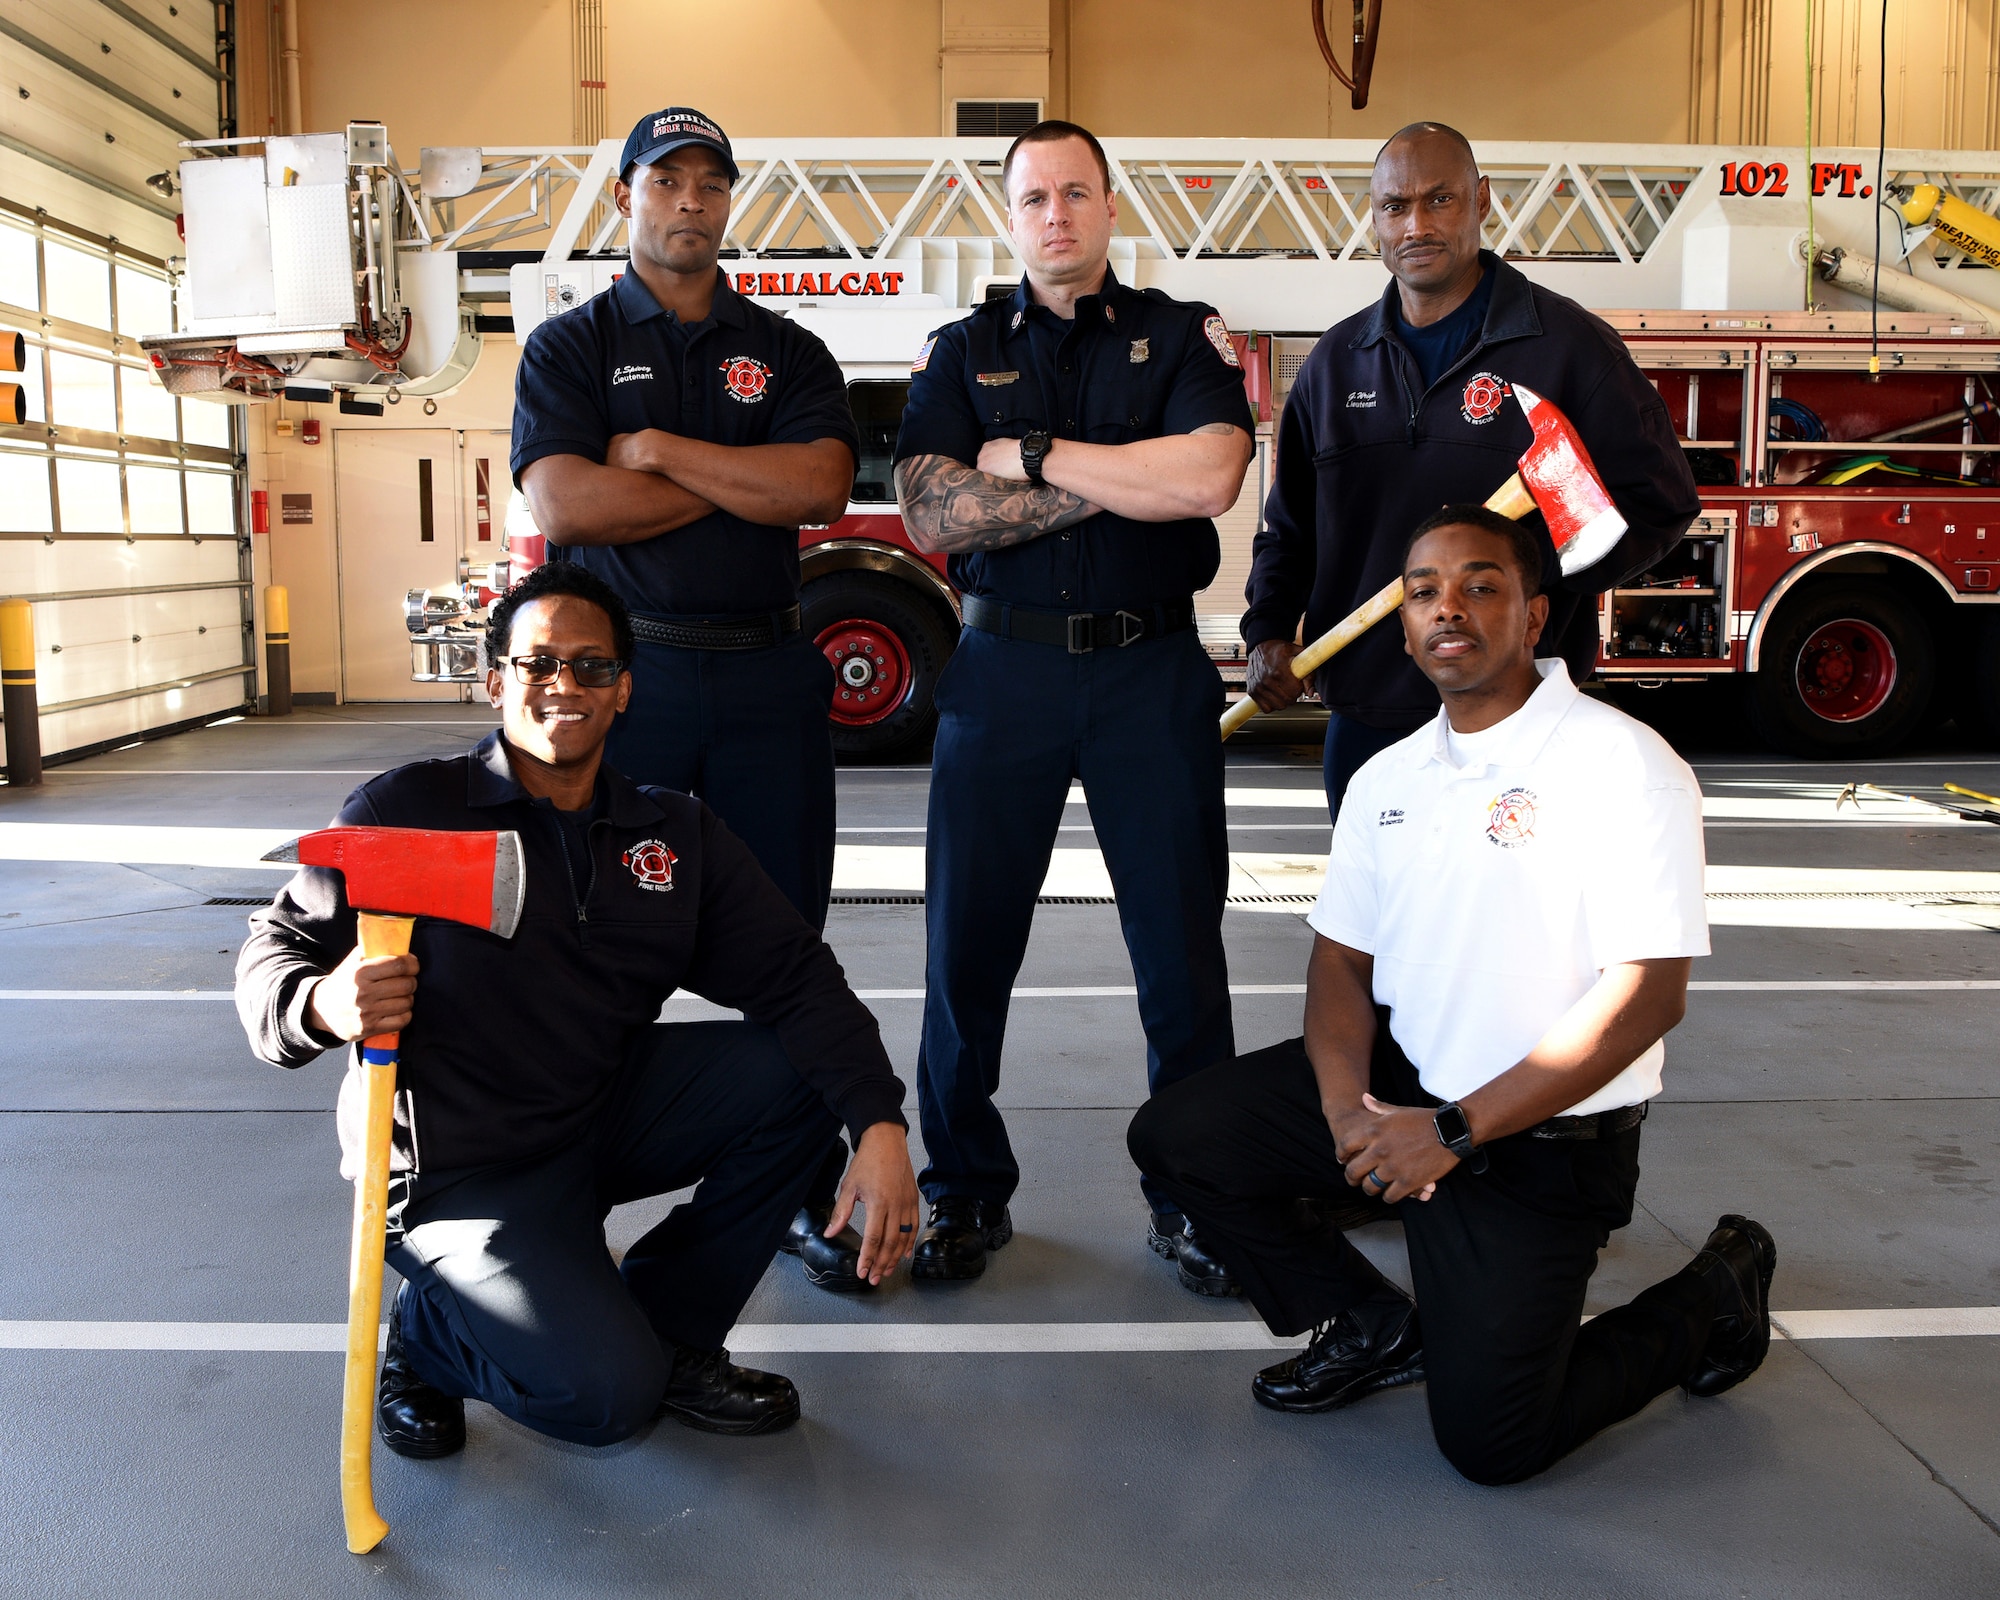 Robins firefighters use boxing to stay fit to fight flames